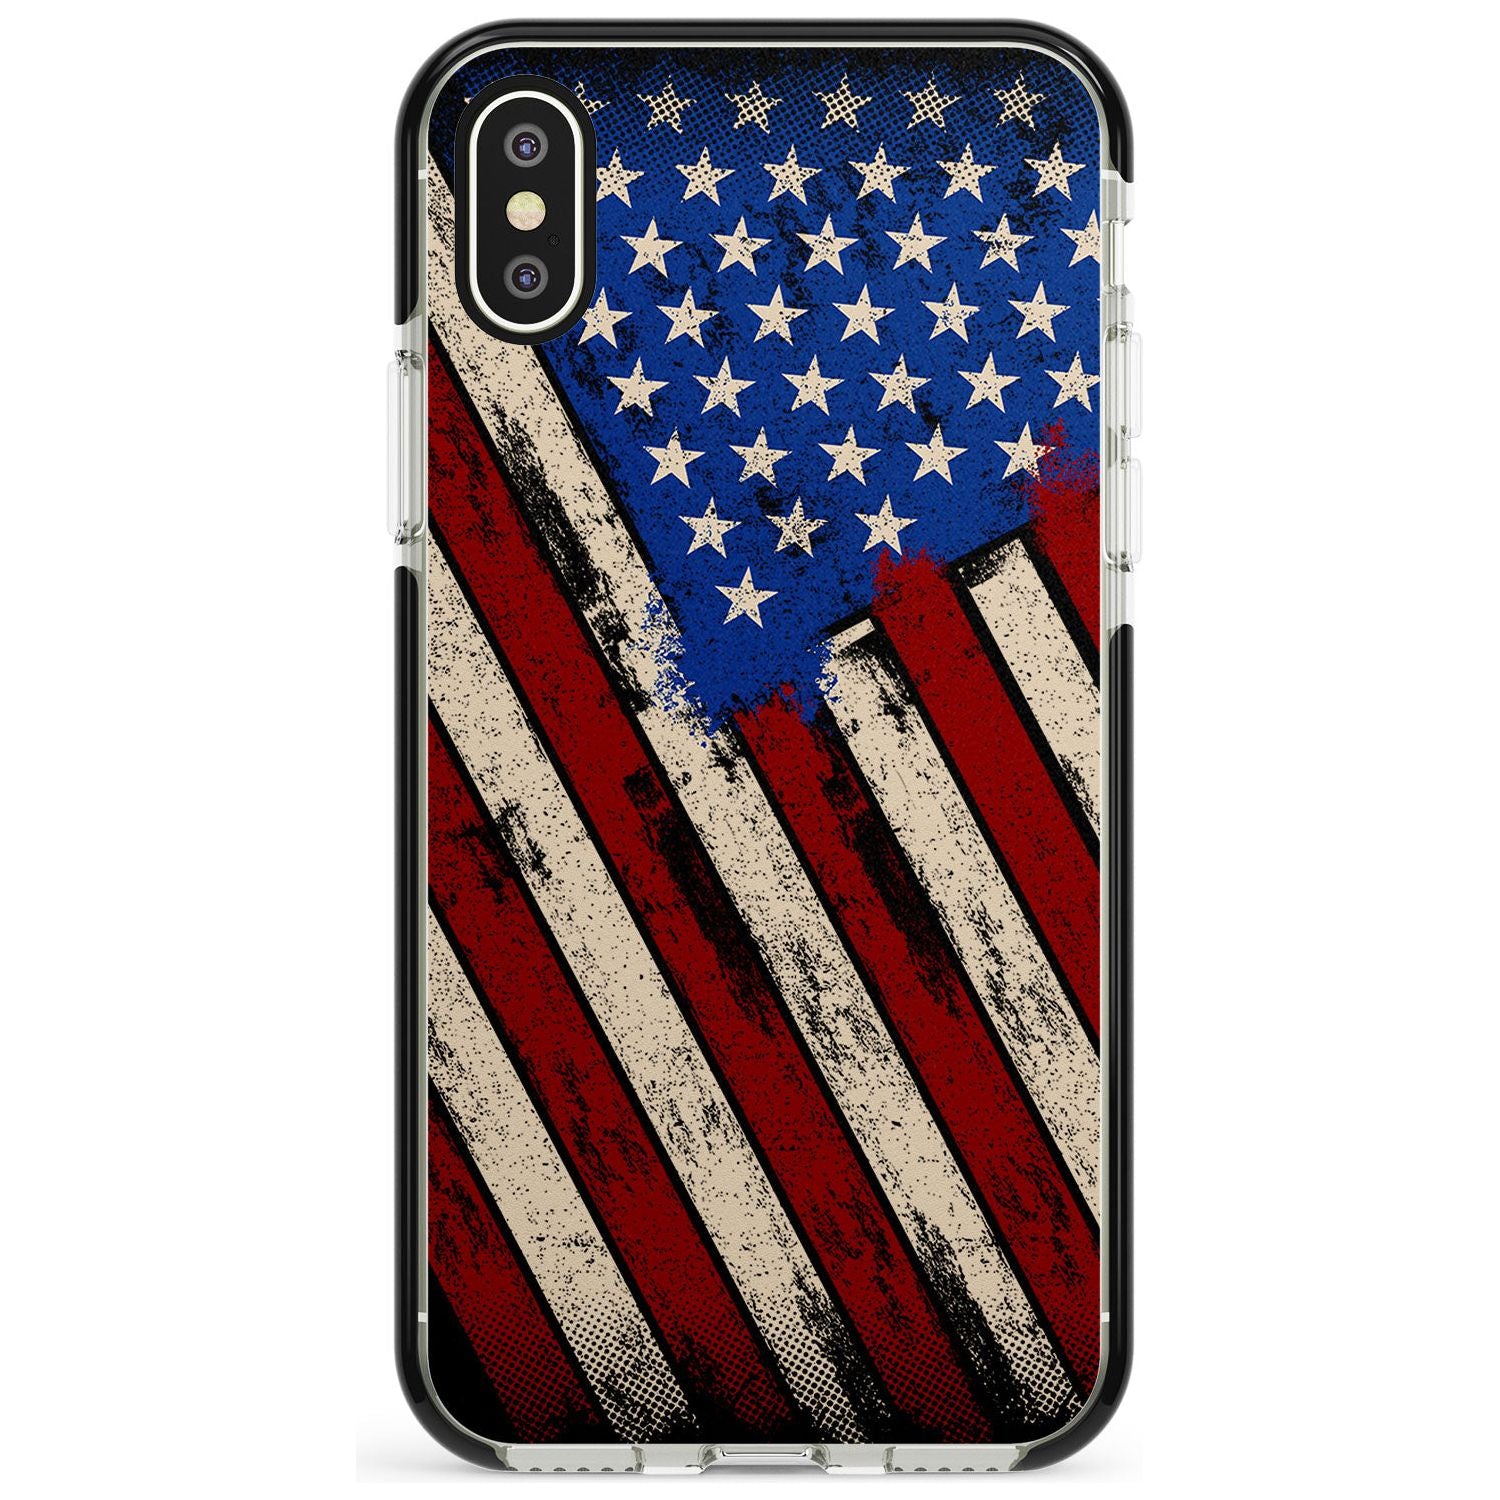 Distressed US Flag Black Impact Phone Case for iPhone X XS Max XR